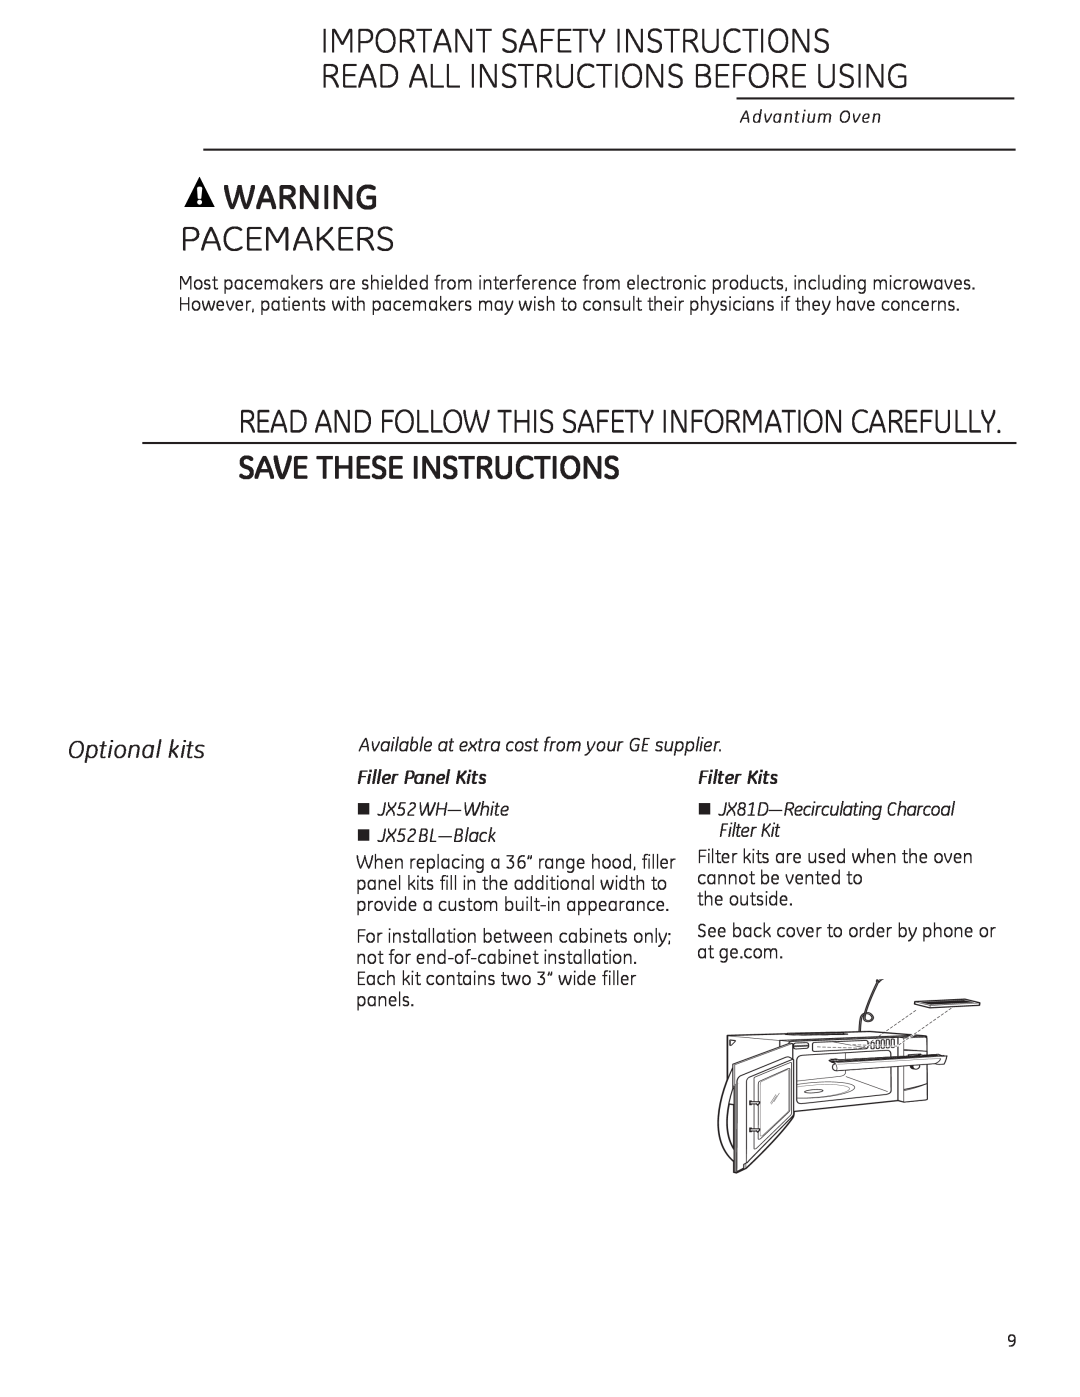 GE ZSA2201 Pacemakers, Save These Instructions, Read And Follow This Safety Information Carefully, Optional kits 